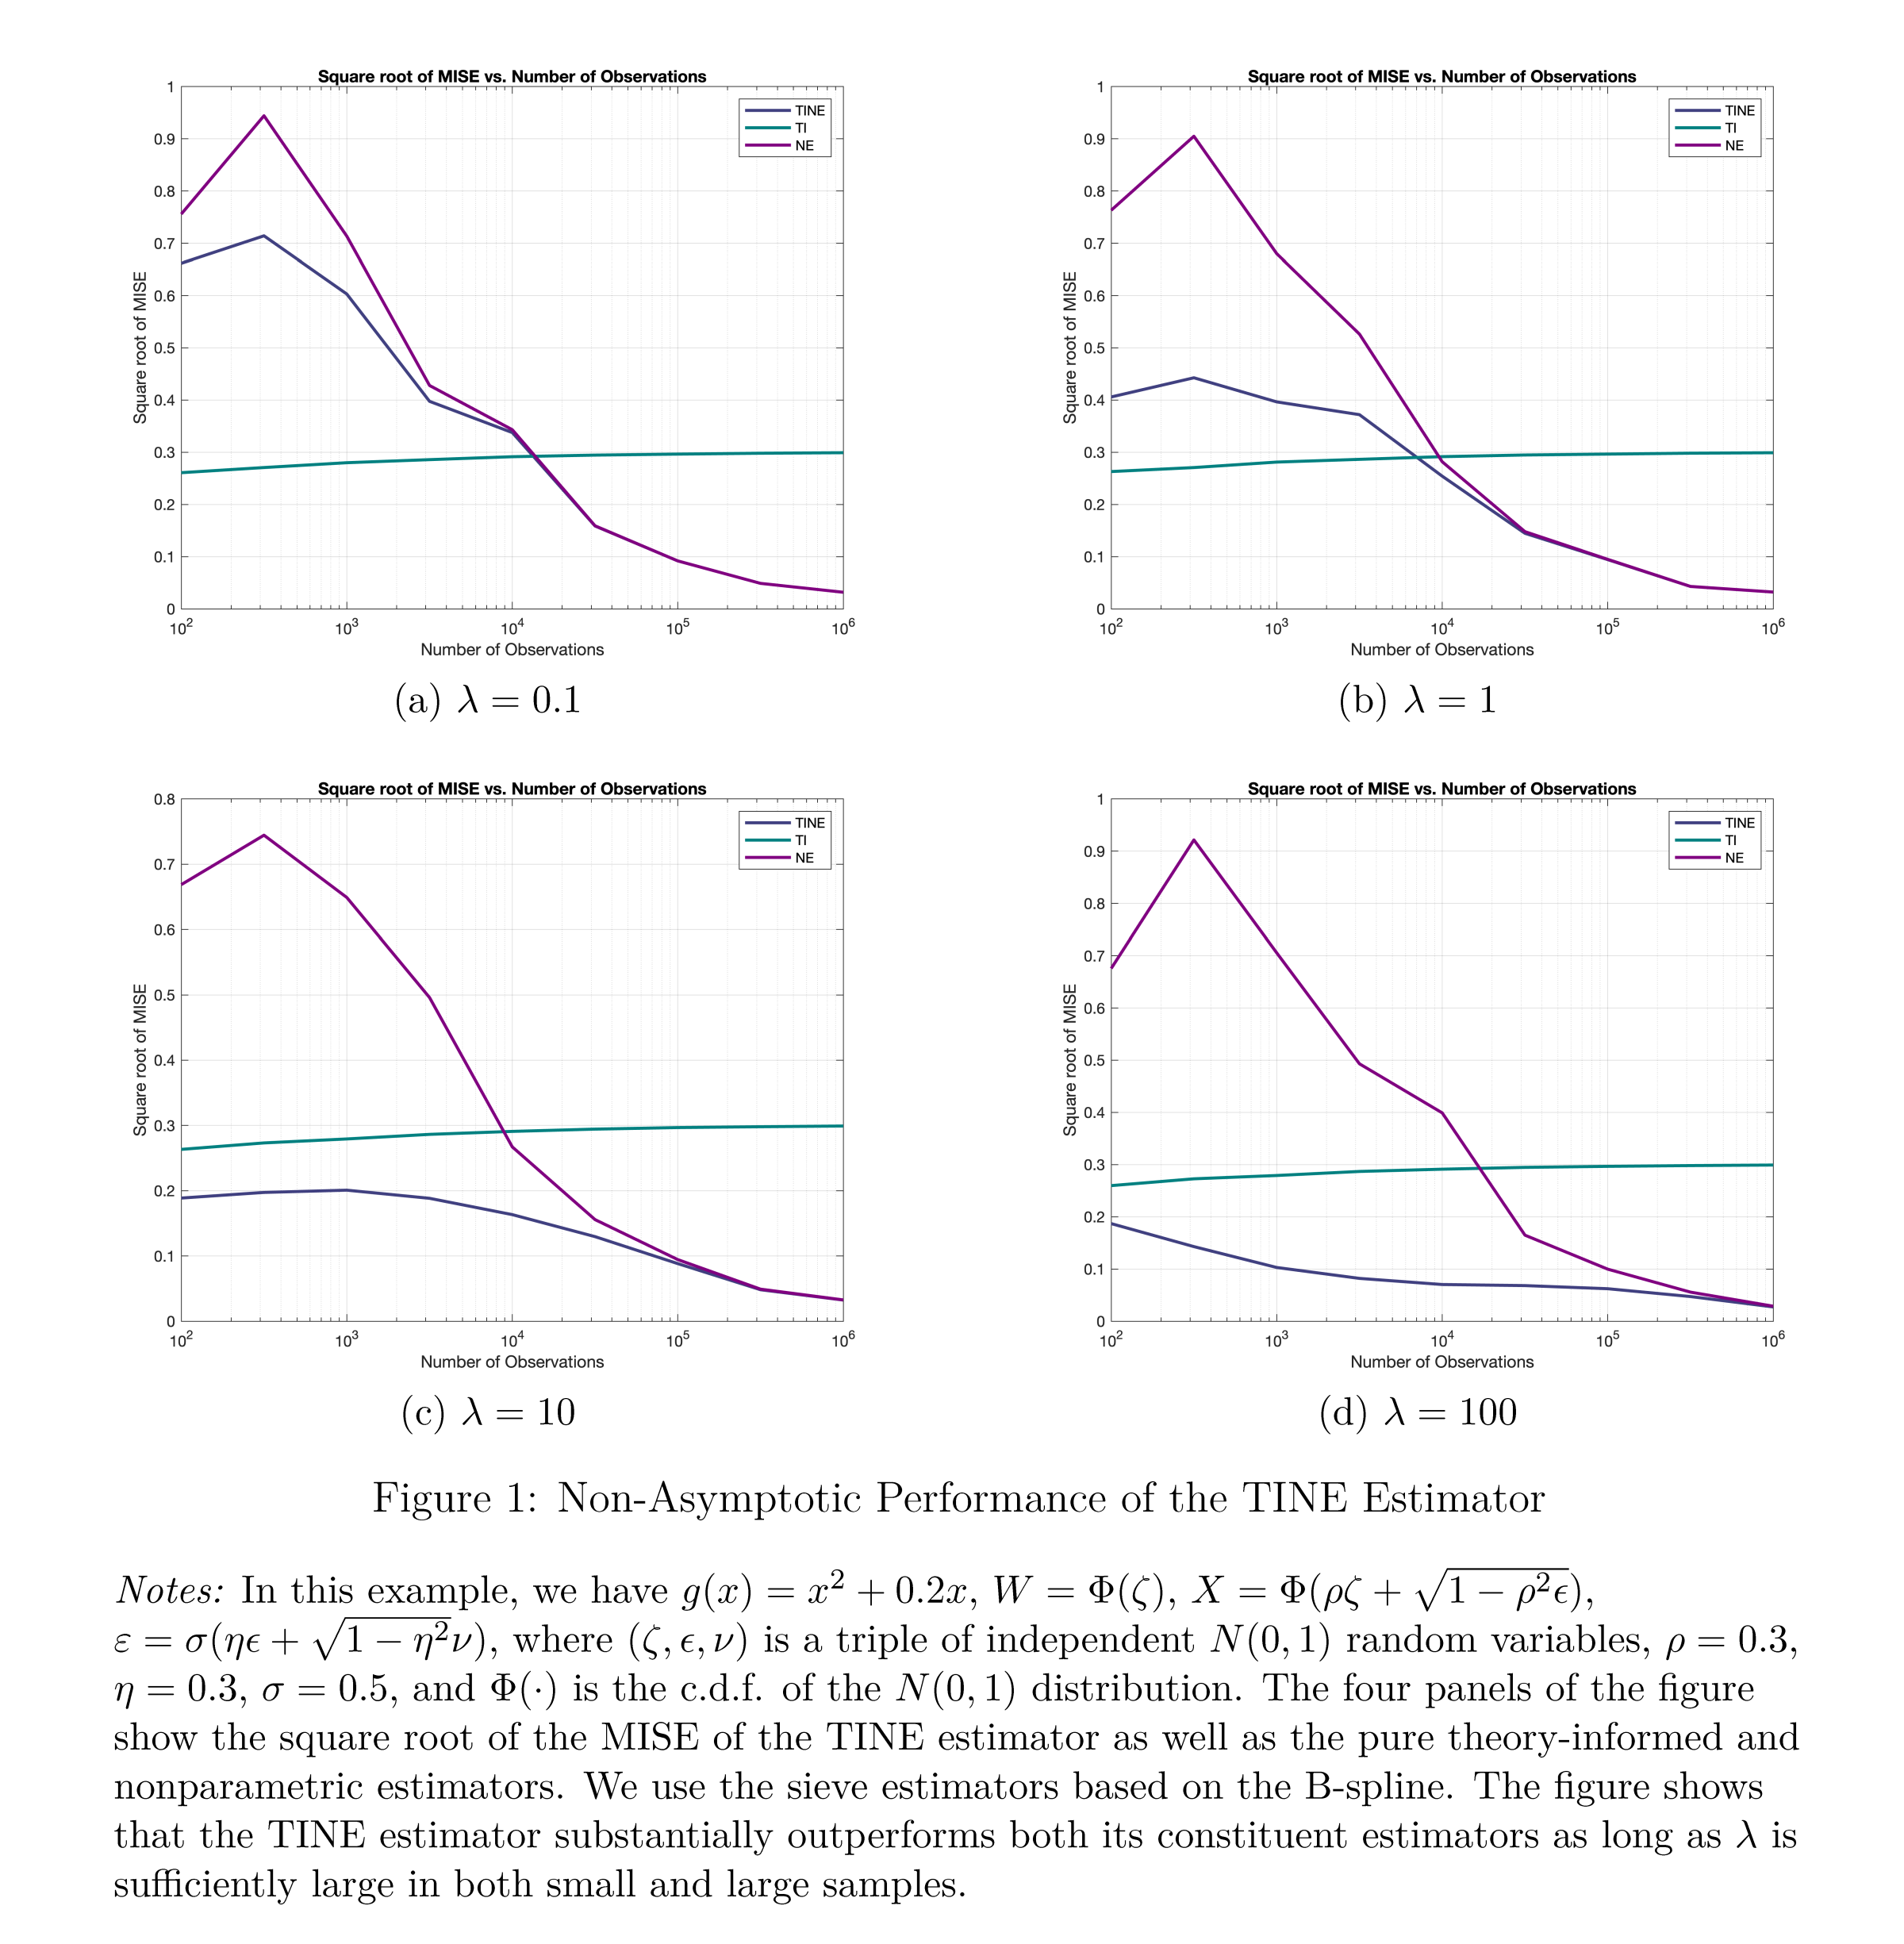 Simulation of TINE Performance Across Sample Size